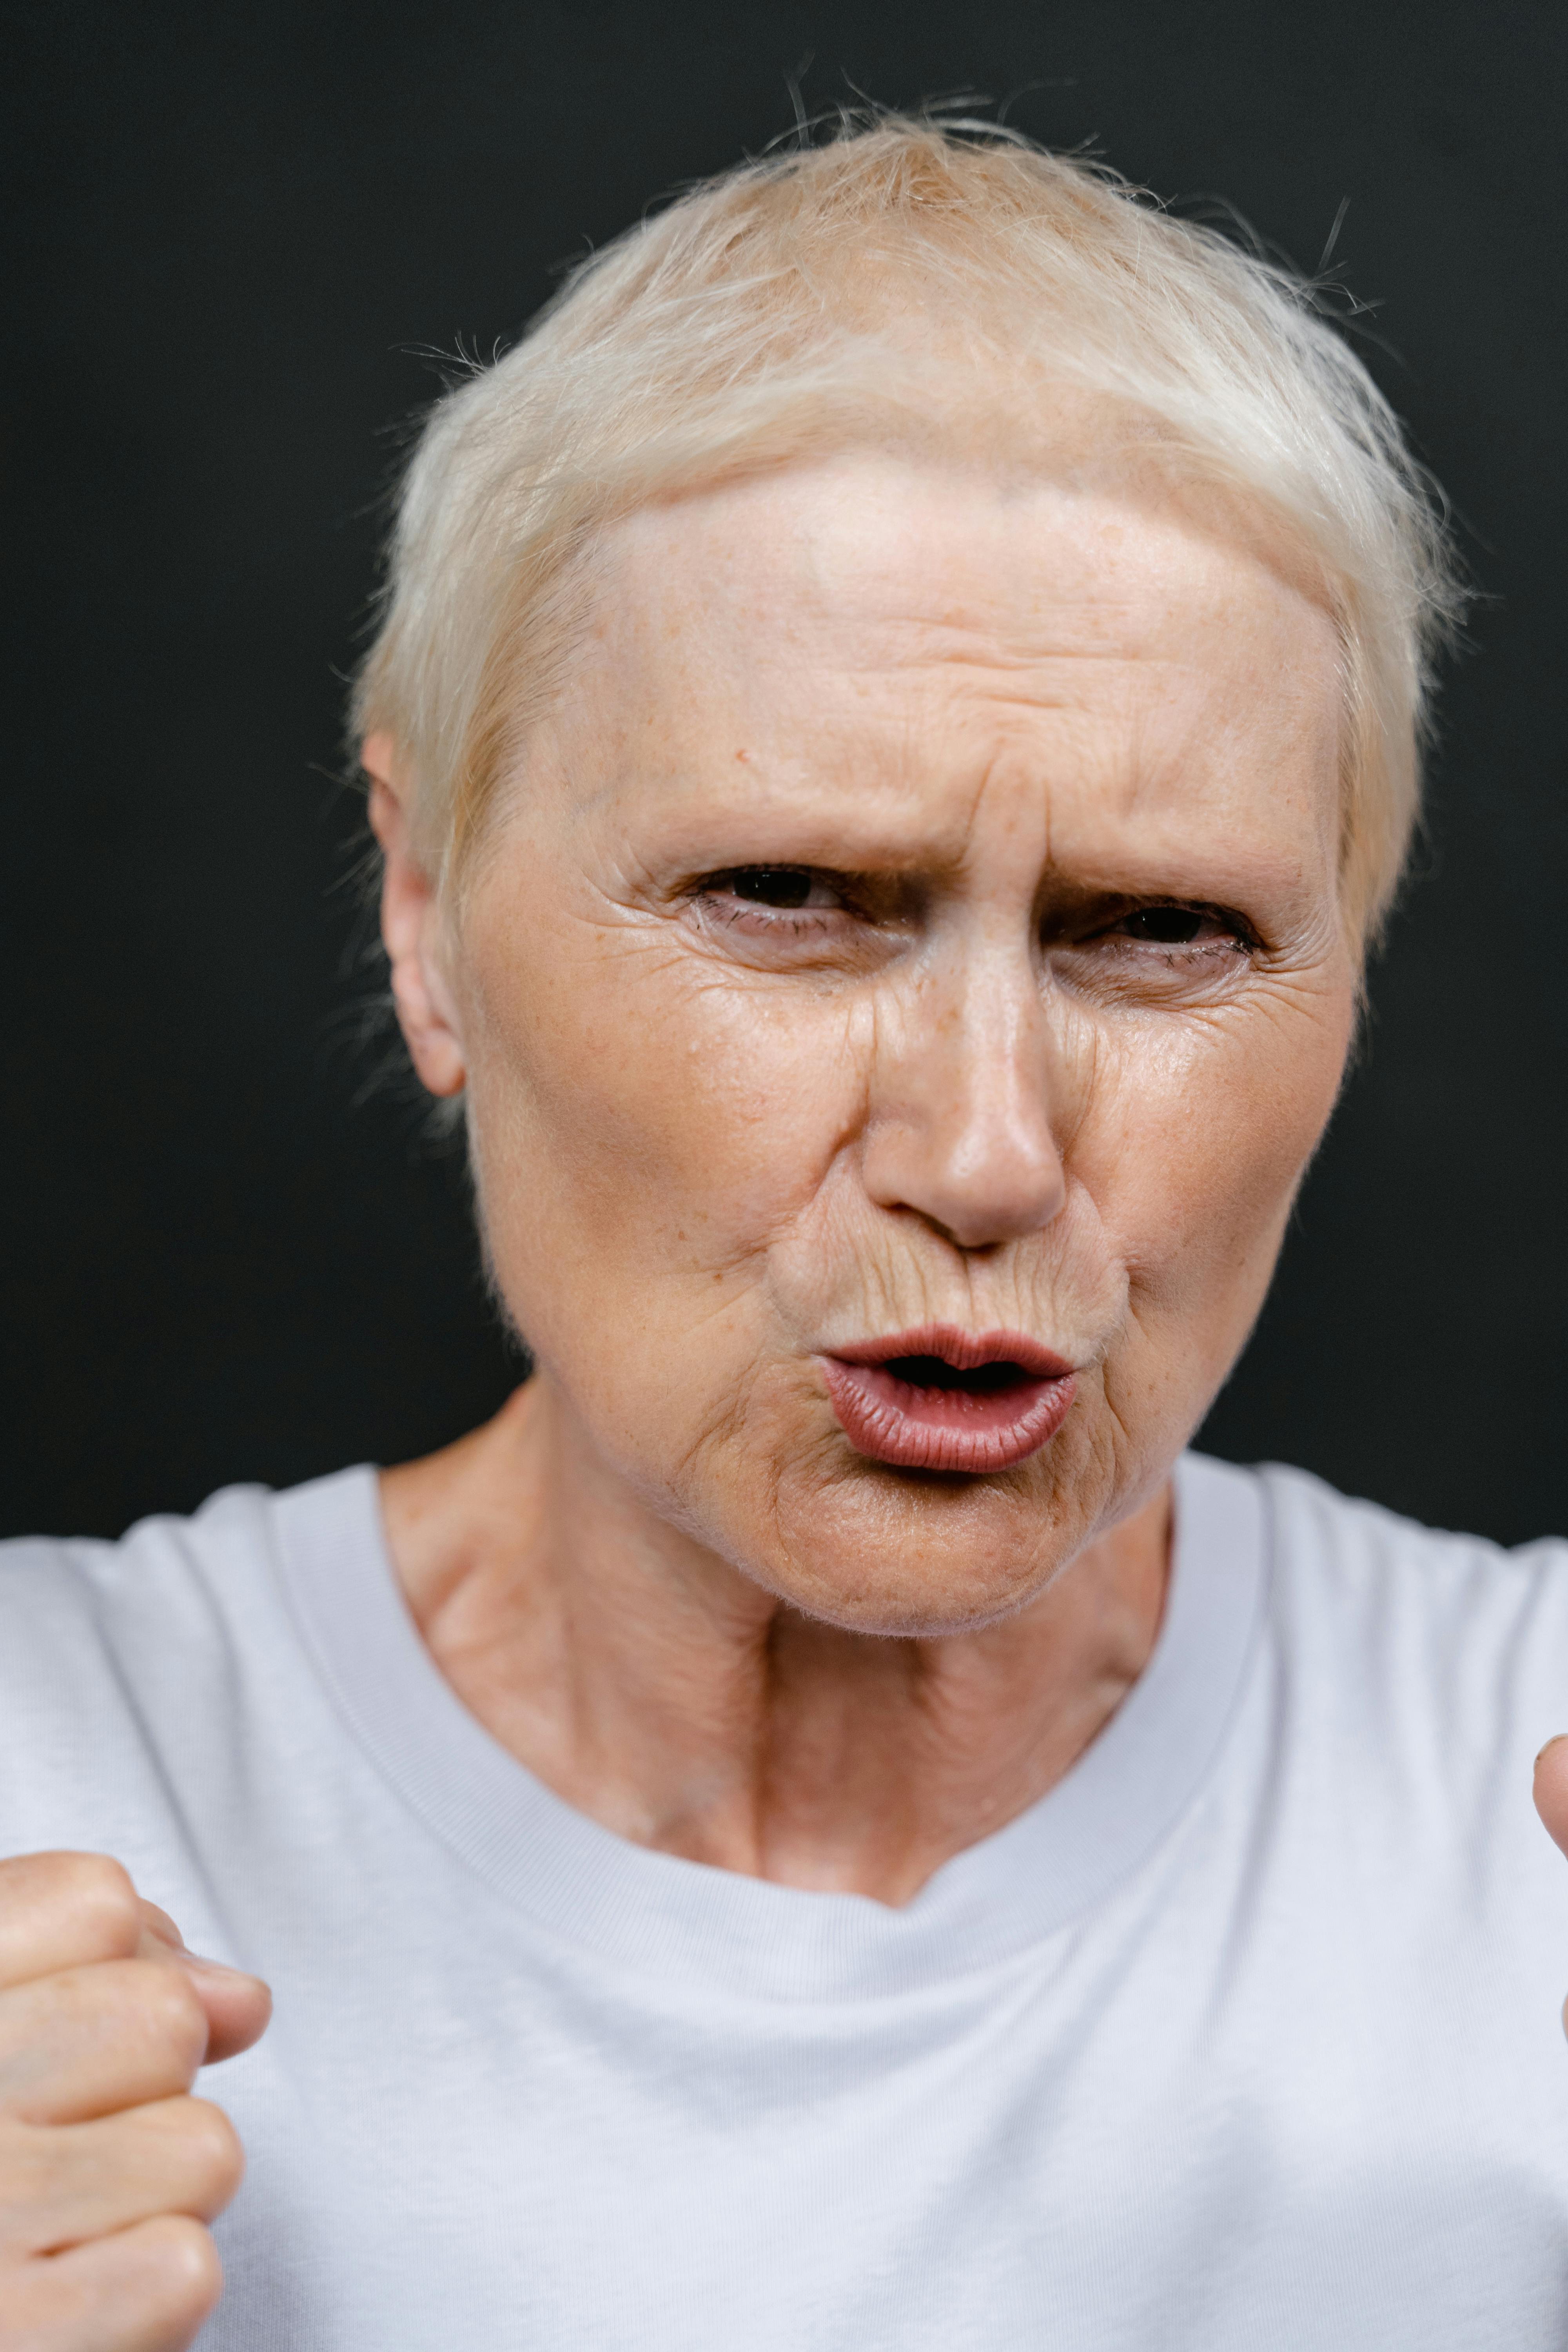 An angry older woman reacting to something | Source: Pexels